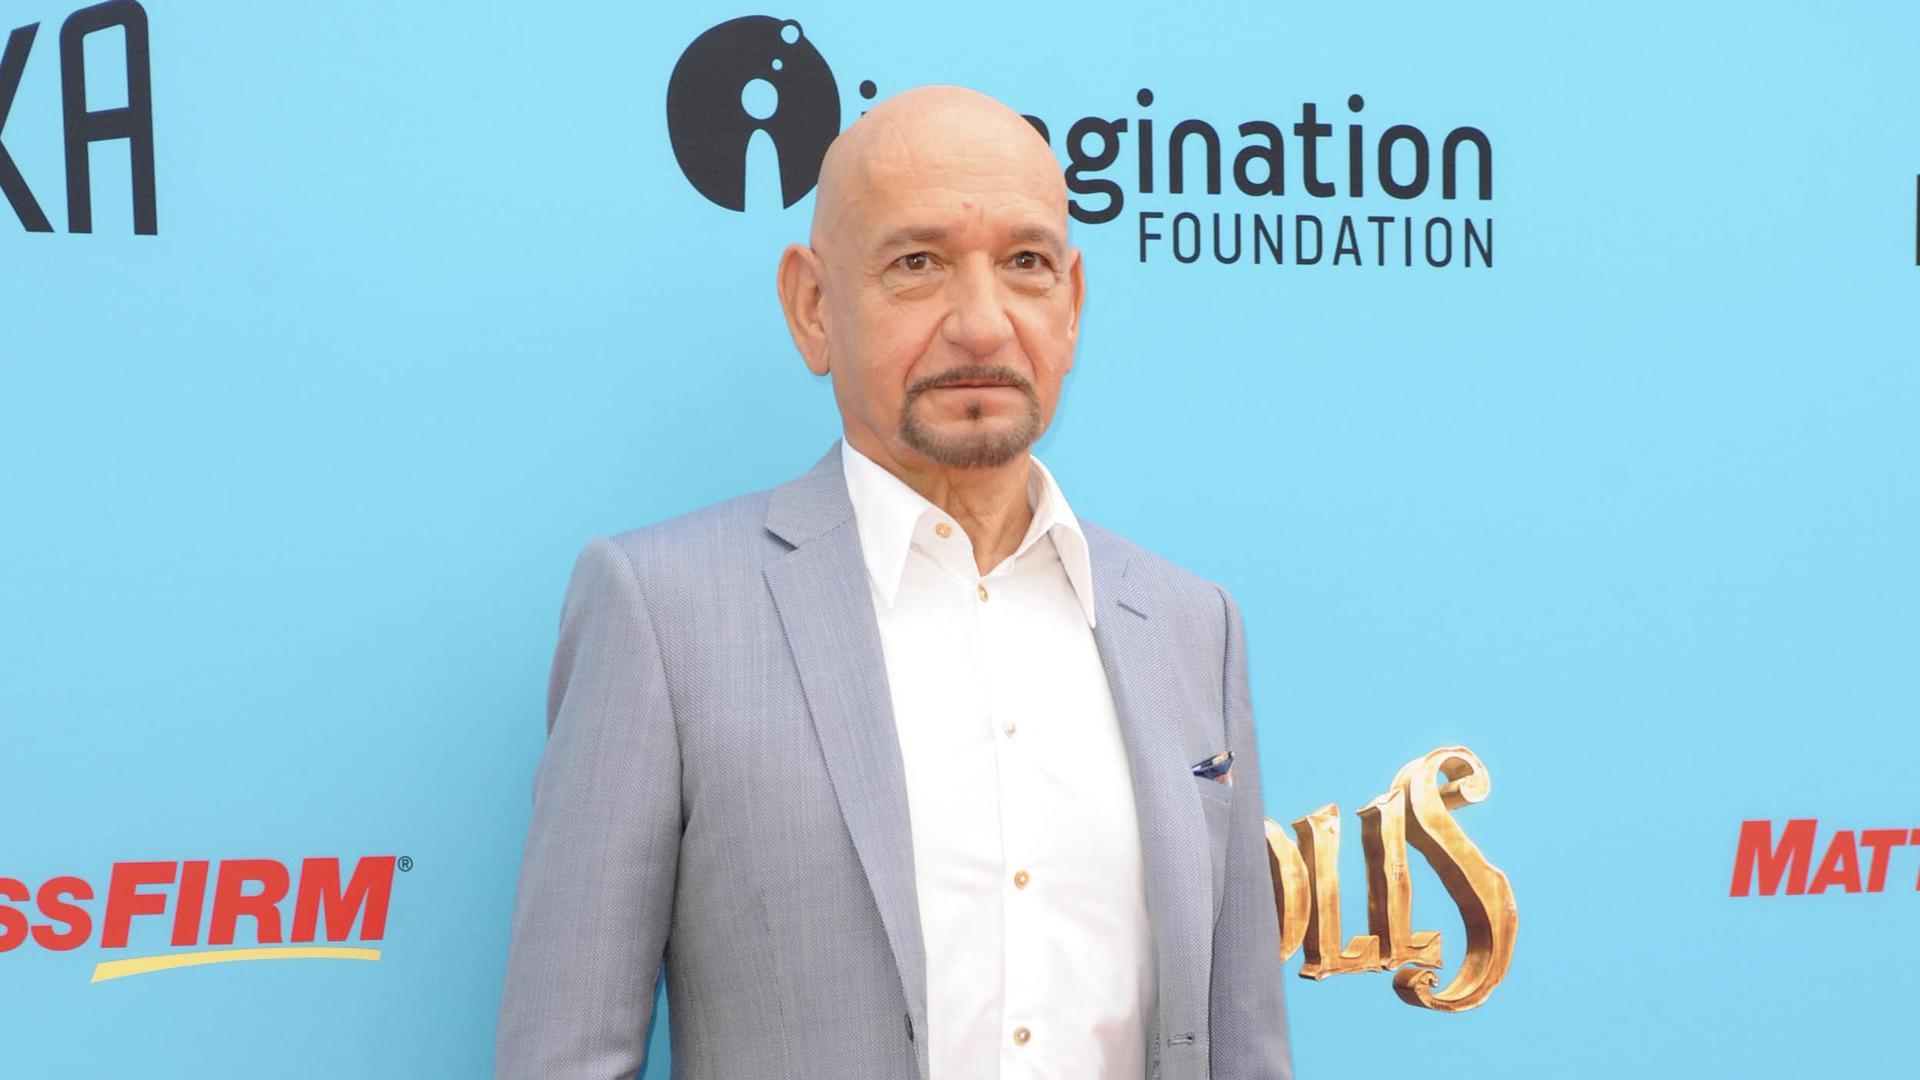 Sir Ben Kingsley played a nasty trick on a fan (VIDEO)